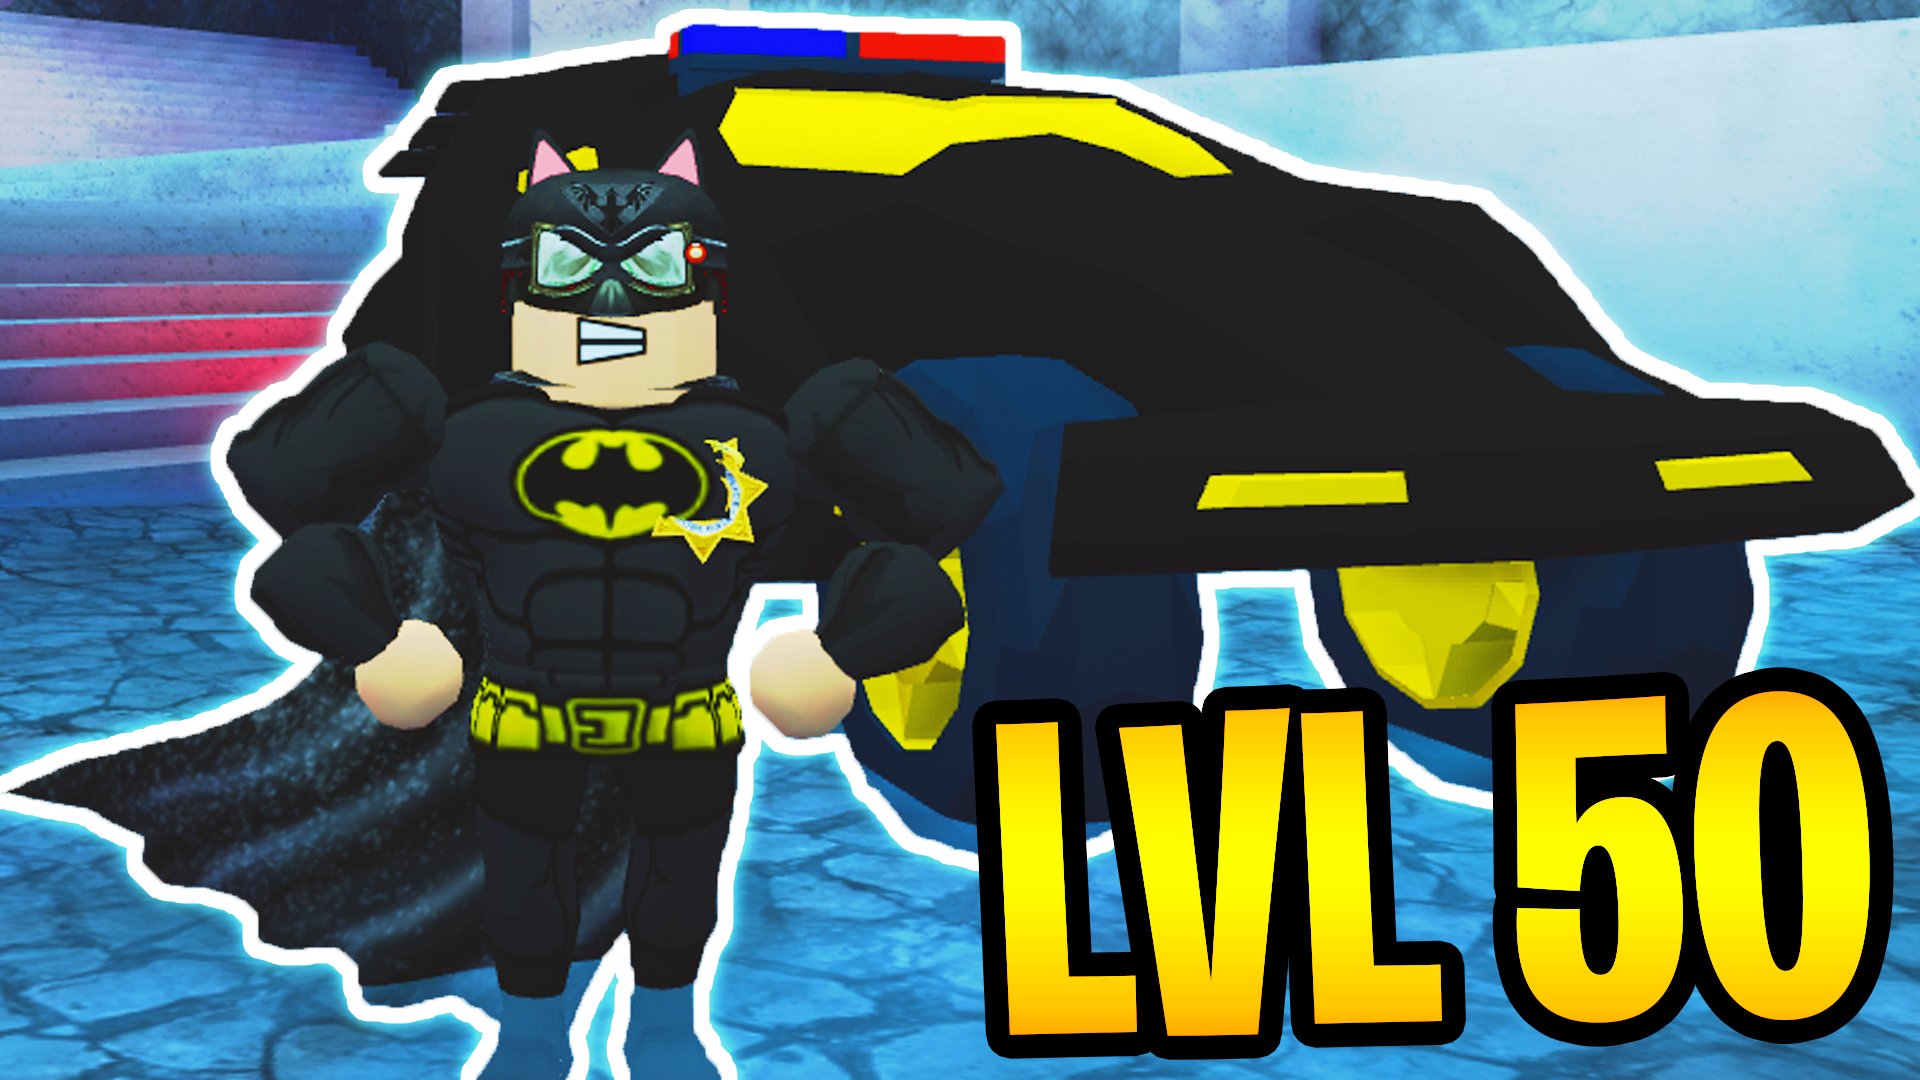 Kreekcraft On Twitter Live With The Roblox Jailbreak Winter Update Https T Co O8nivzc4c9 Come Join We Re Level 45 50 And Almost There Also We Have The Batmobile And All The New Stuff Roblox Jailbreak Https T Co Dt9eds99mh - roblox jailbreak how to get the batmobile